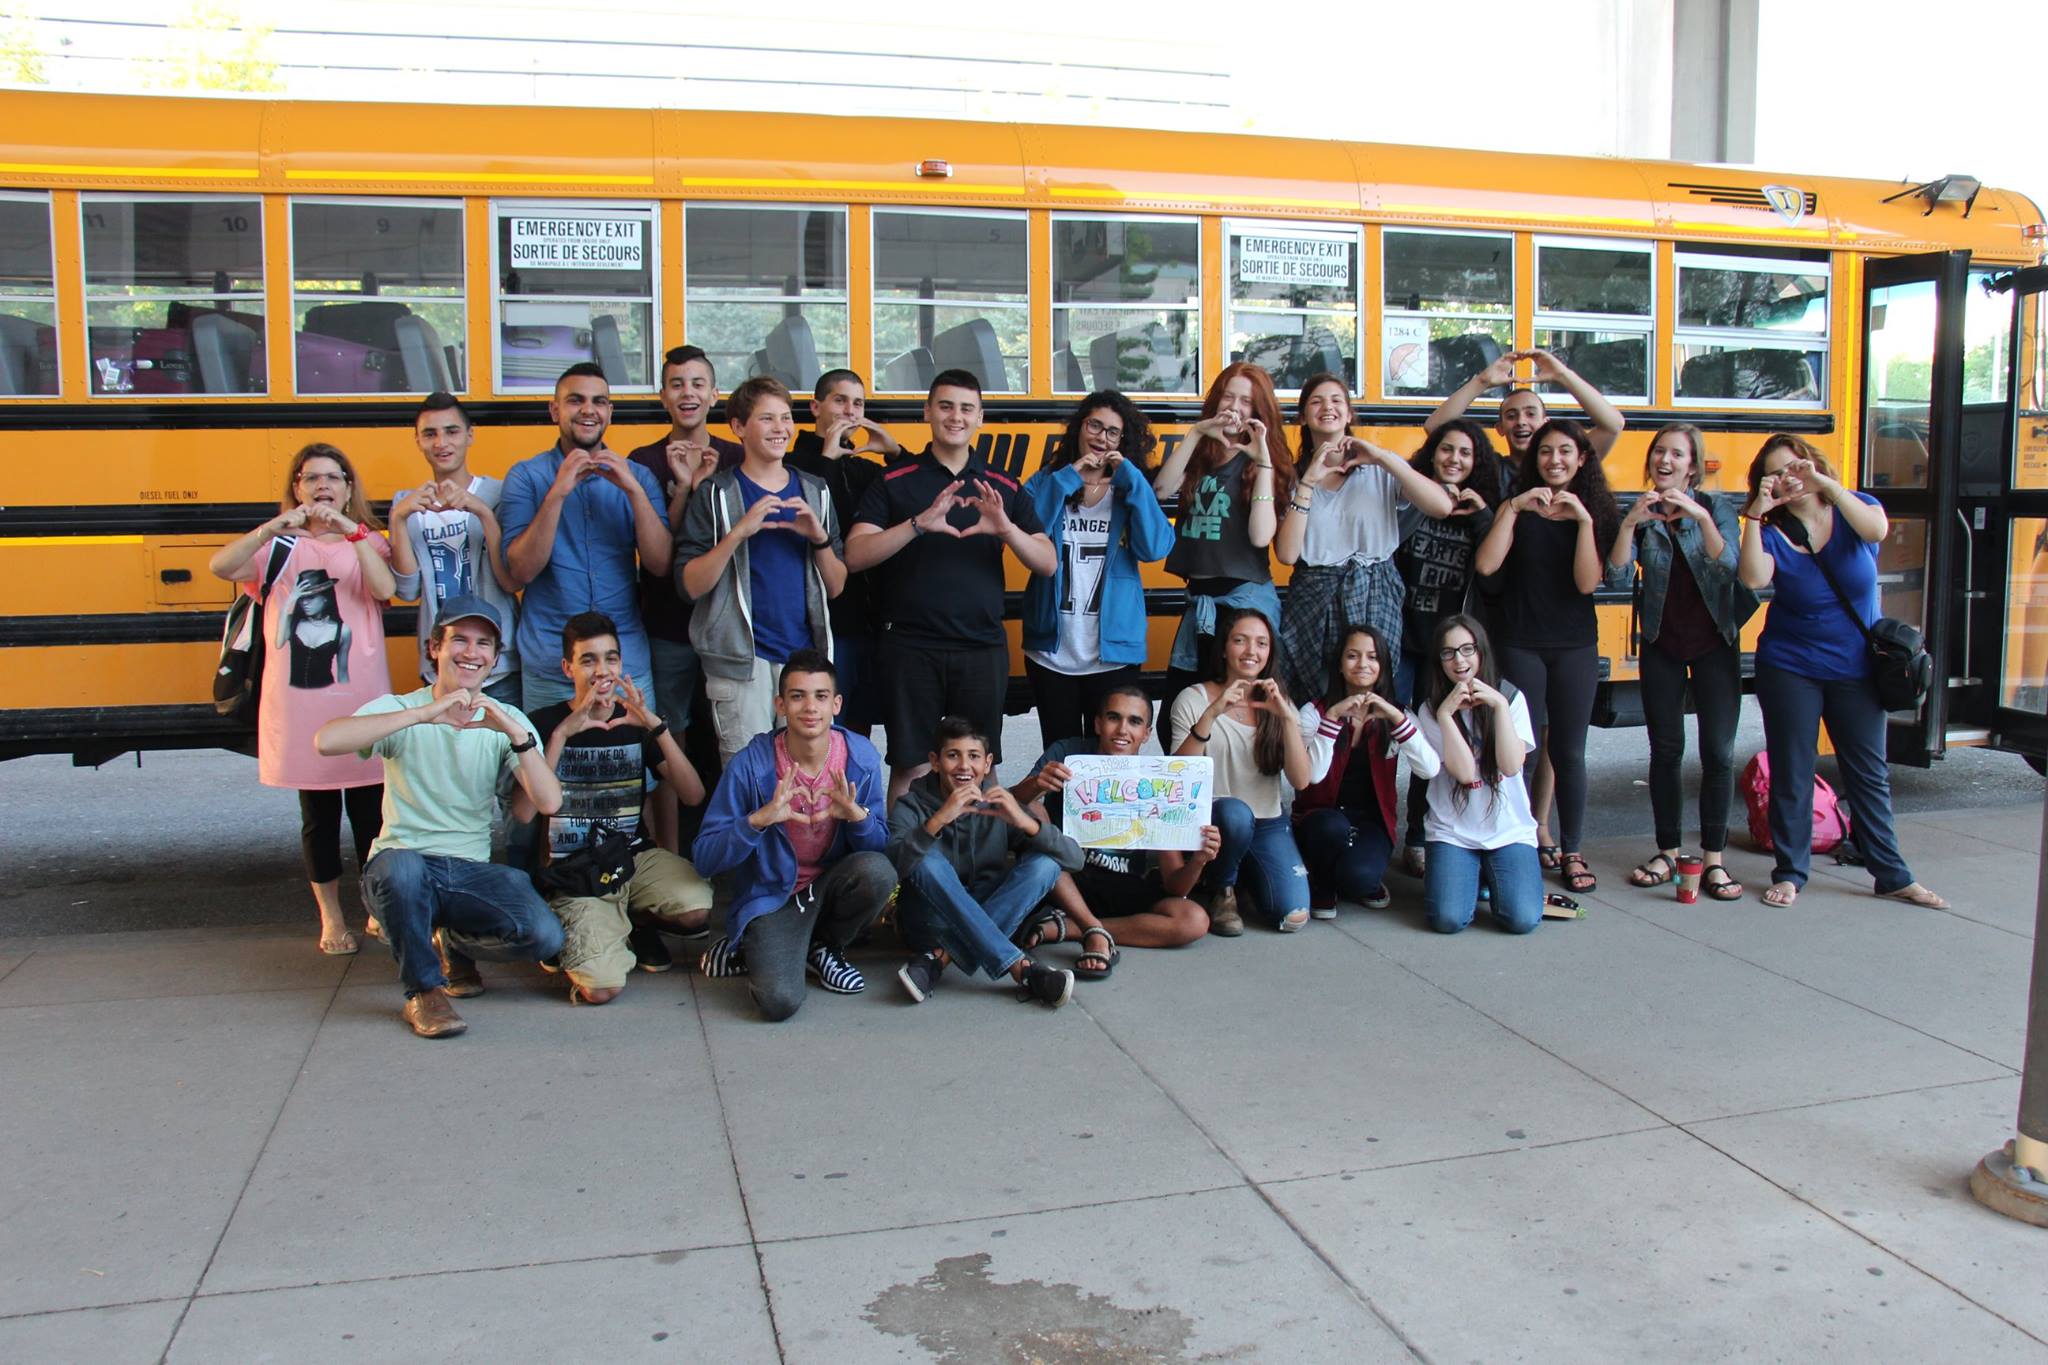 Heart-to-Heart brings Jewish and Palestinian youth together in Canada